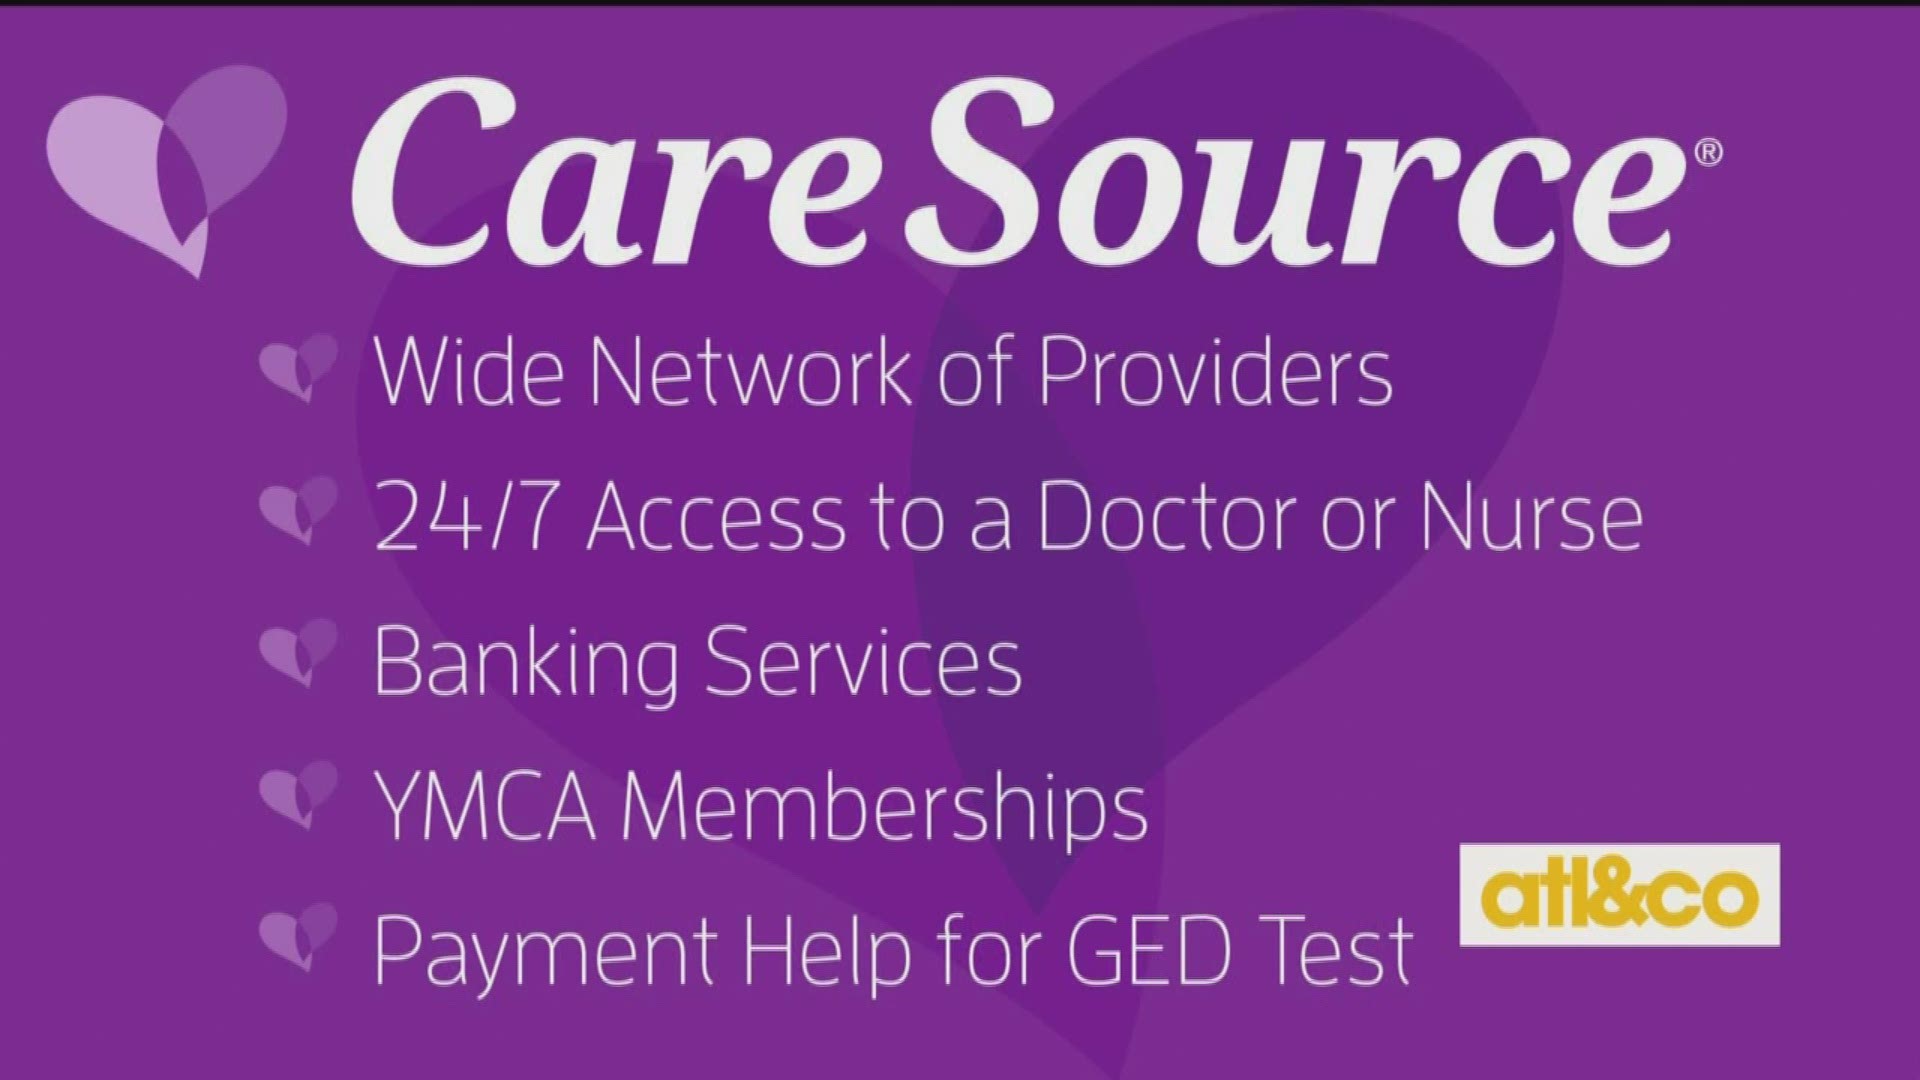 Caresource compared to other care providers cigna procedure codes